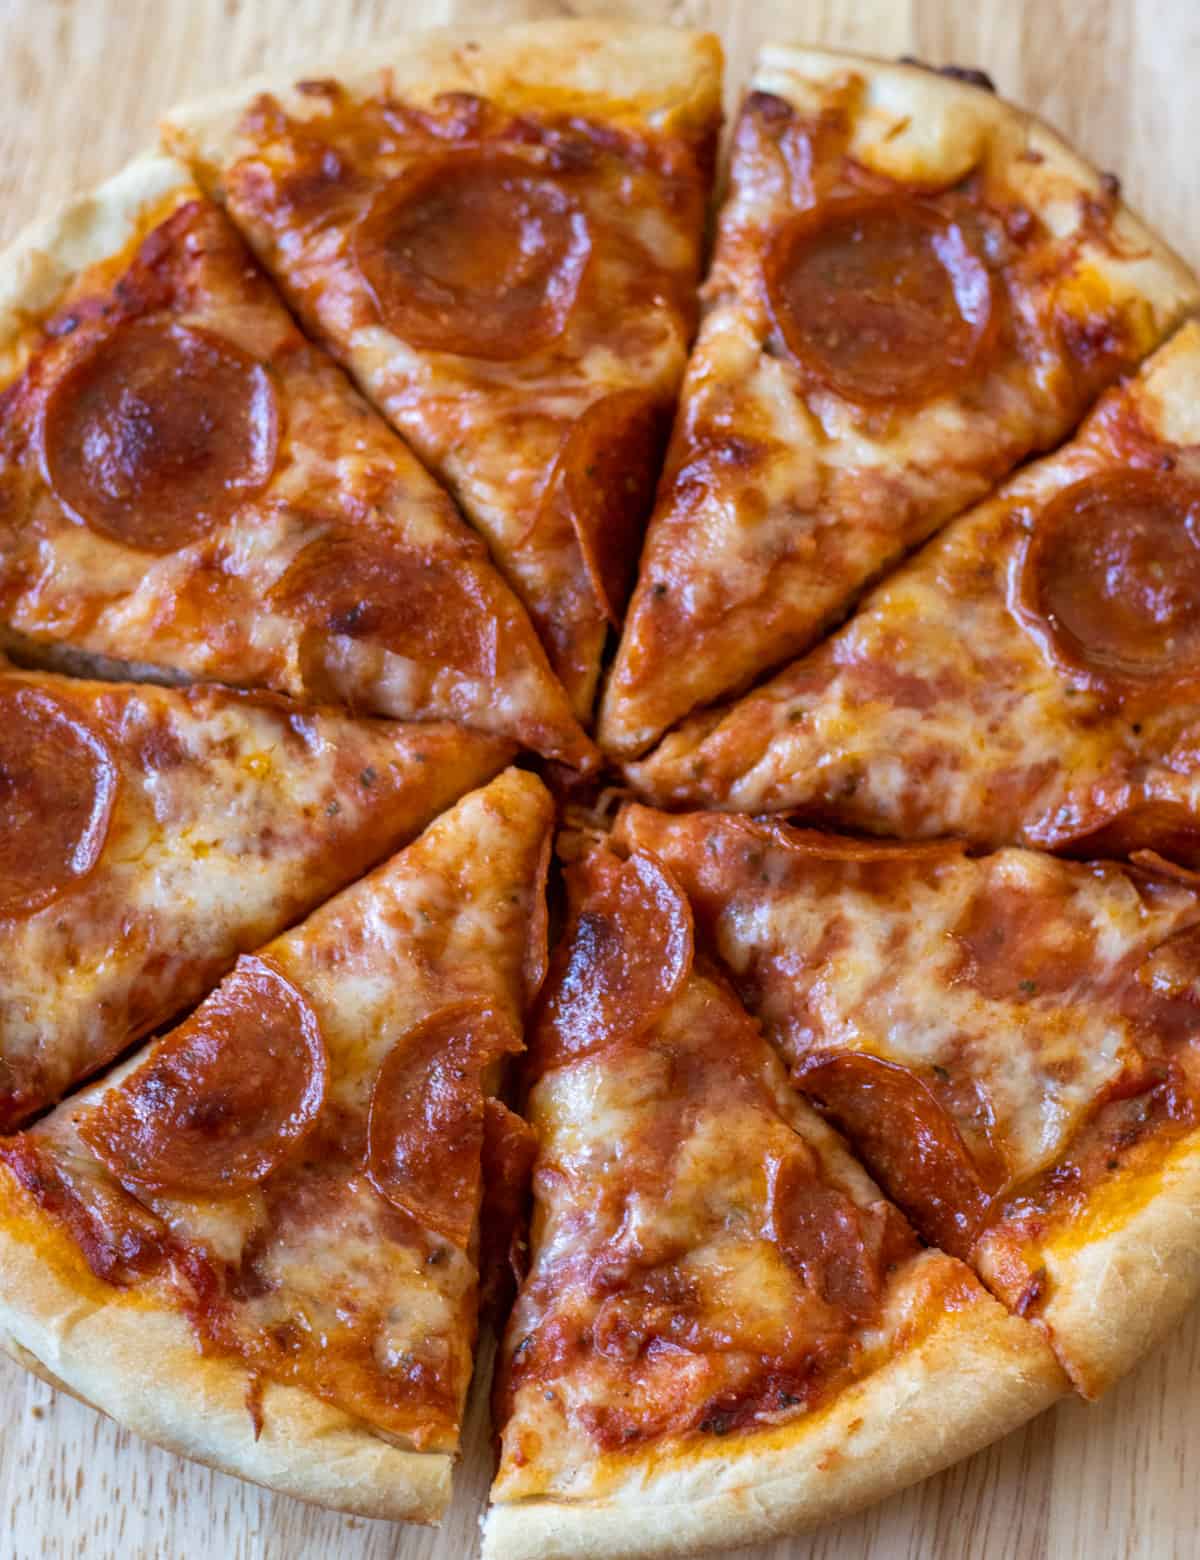 Pepperoni pizza cut into slices.